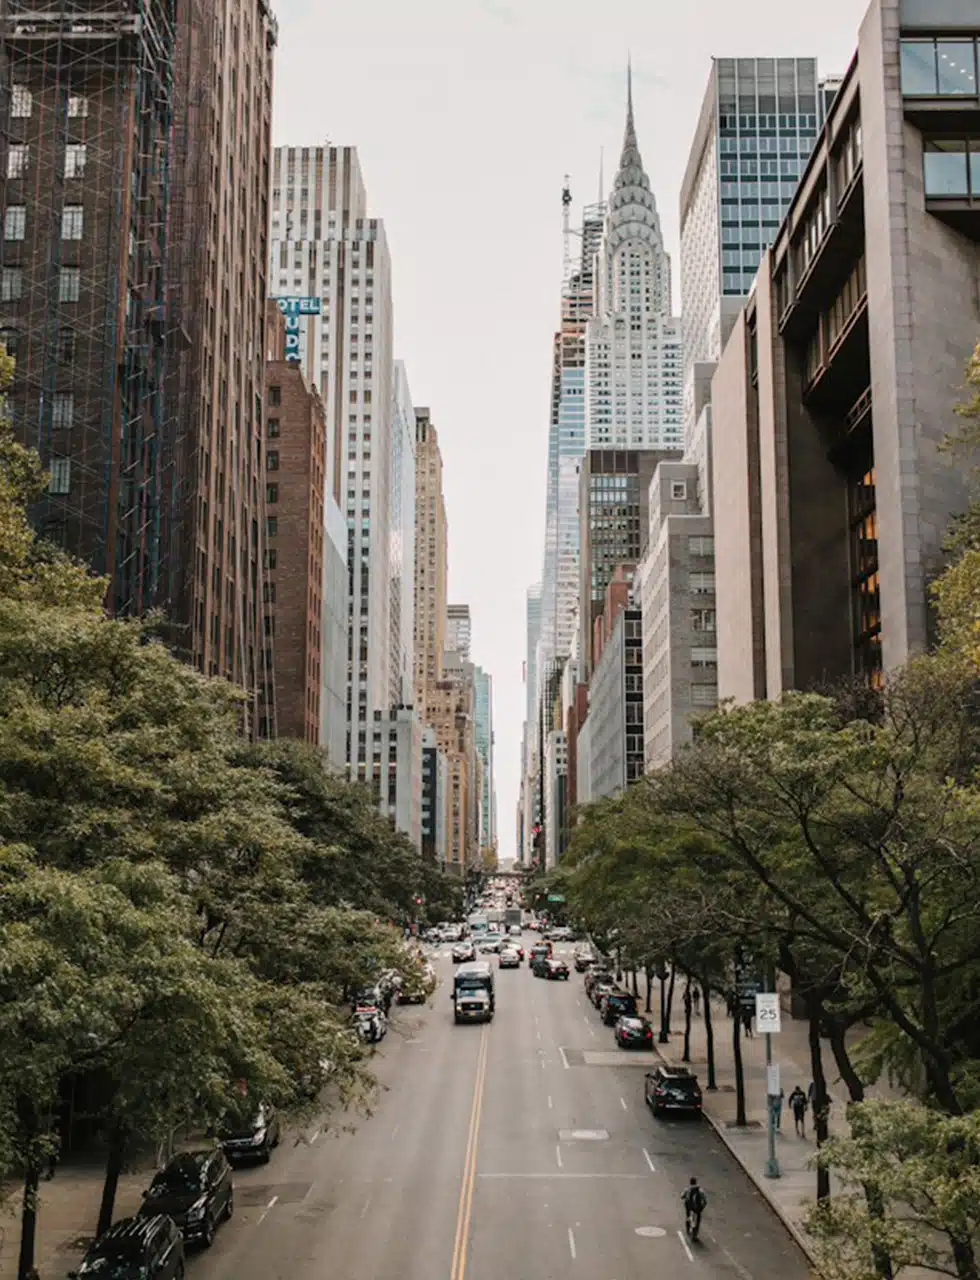 A daylight streetscape of new york, the location of katharine pooleys new design studio